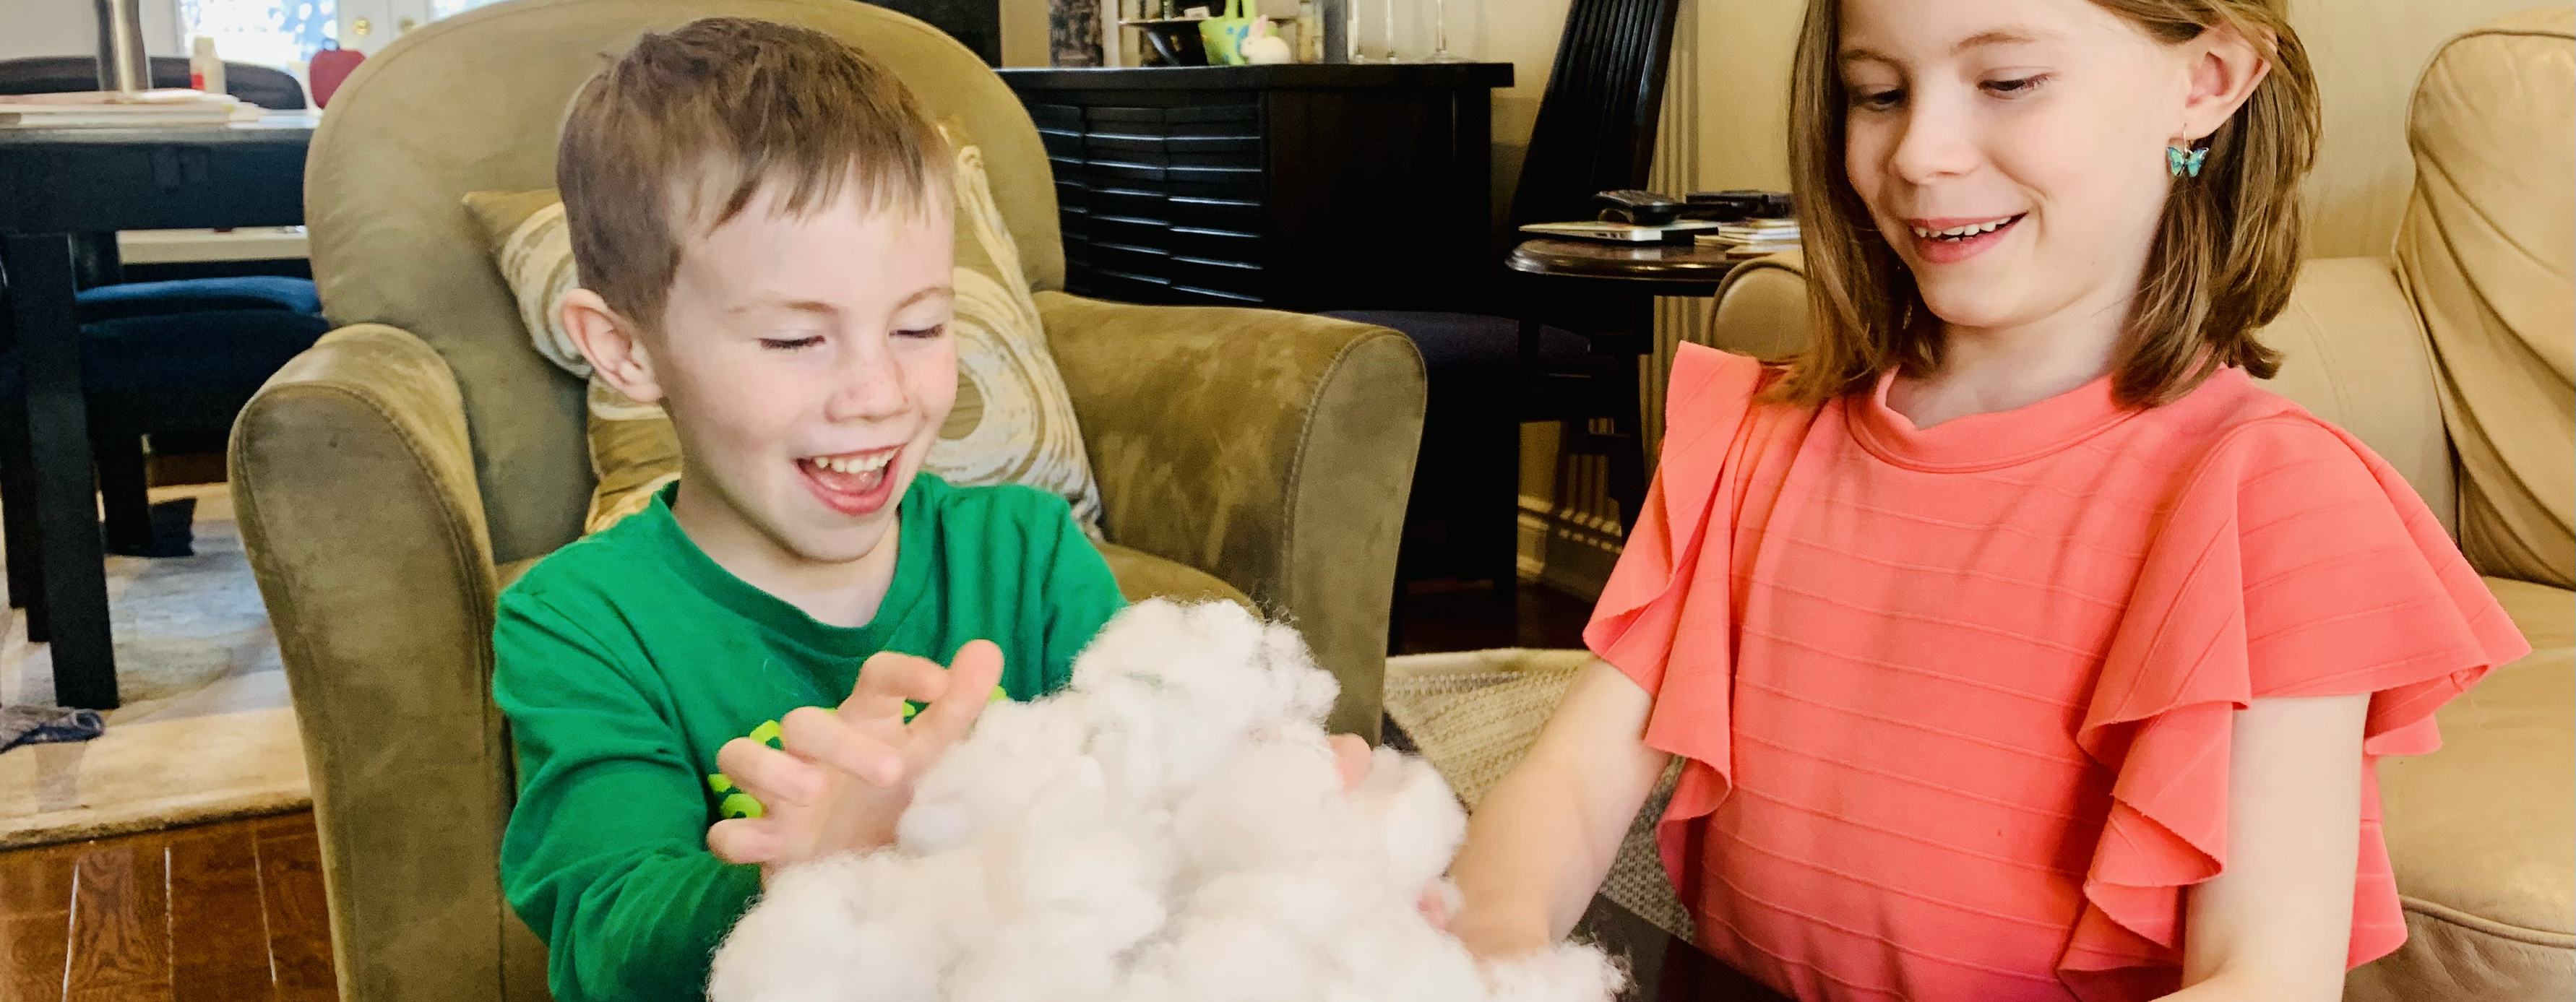 Two young children playing with cotton on a coffee table in a living room